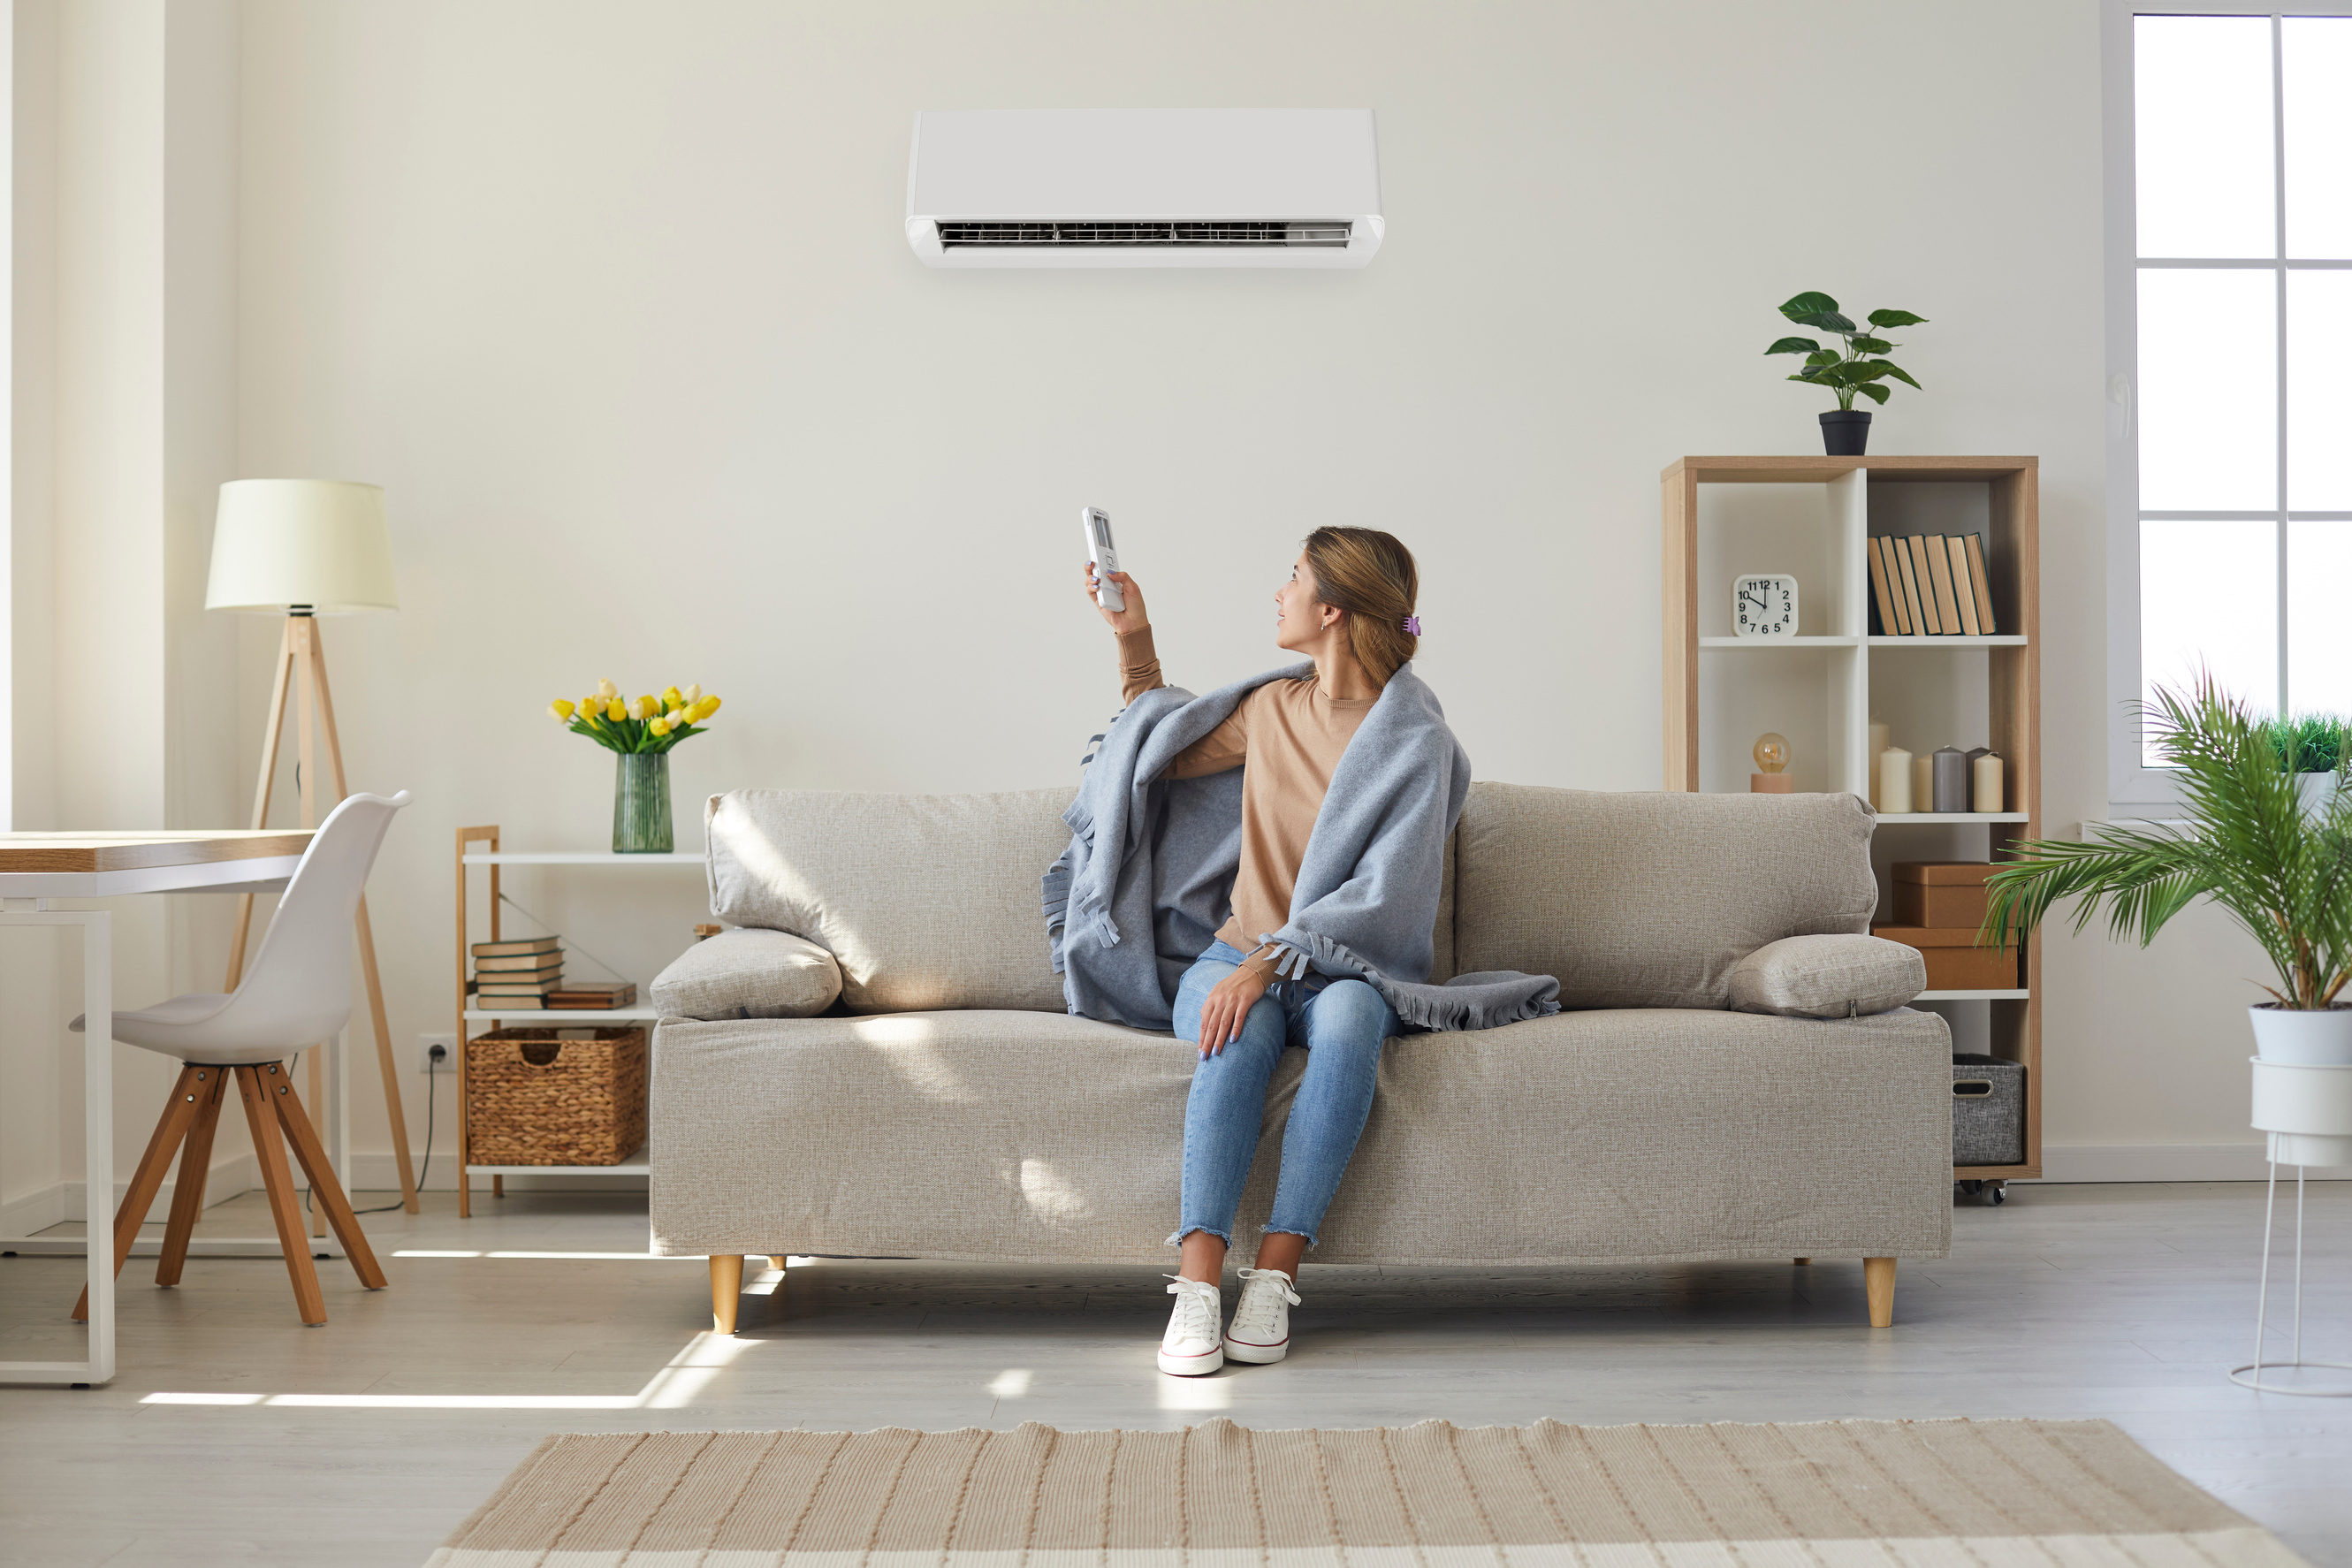 Woman enjoying cool fresh air in her living room with a ductless unit on the wall as she adjusts the temperature using a remote control.